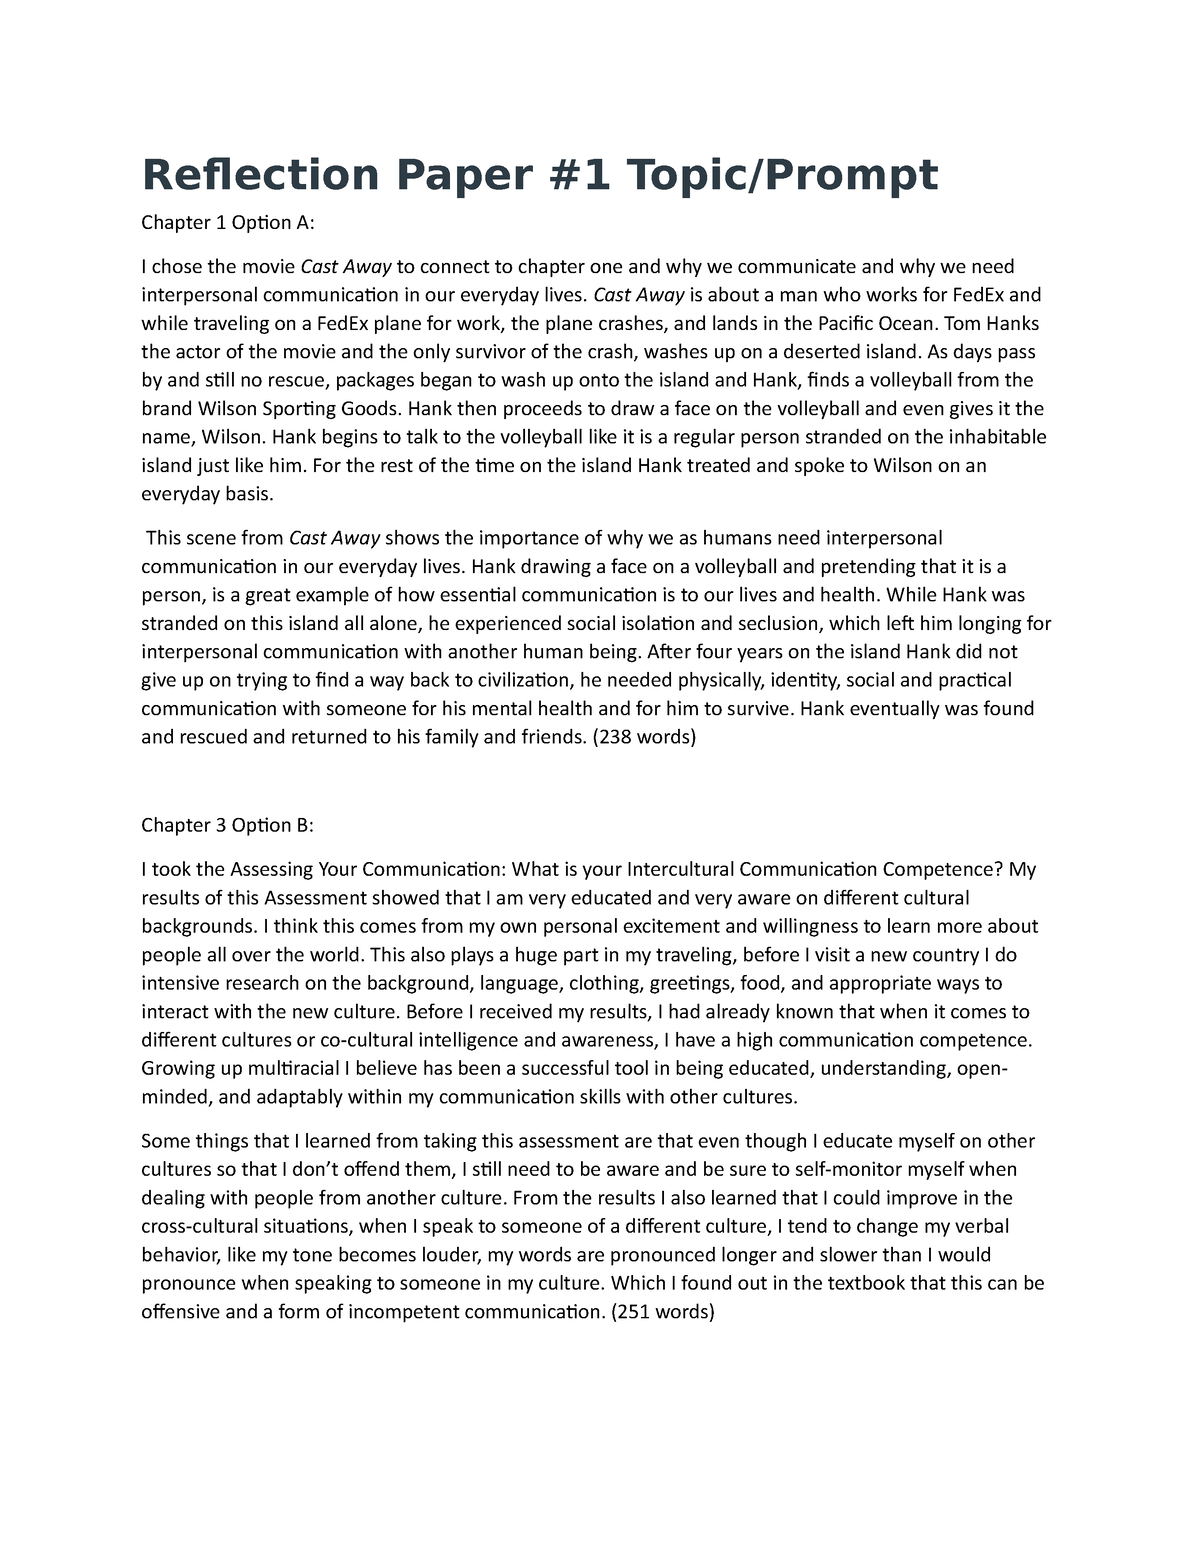 thesis statement reflection paper